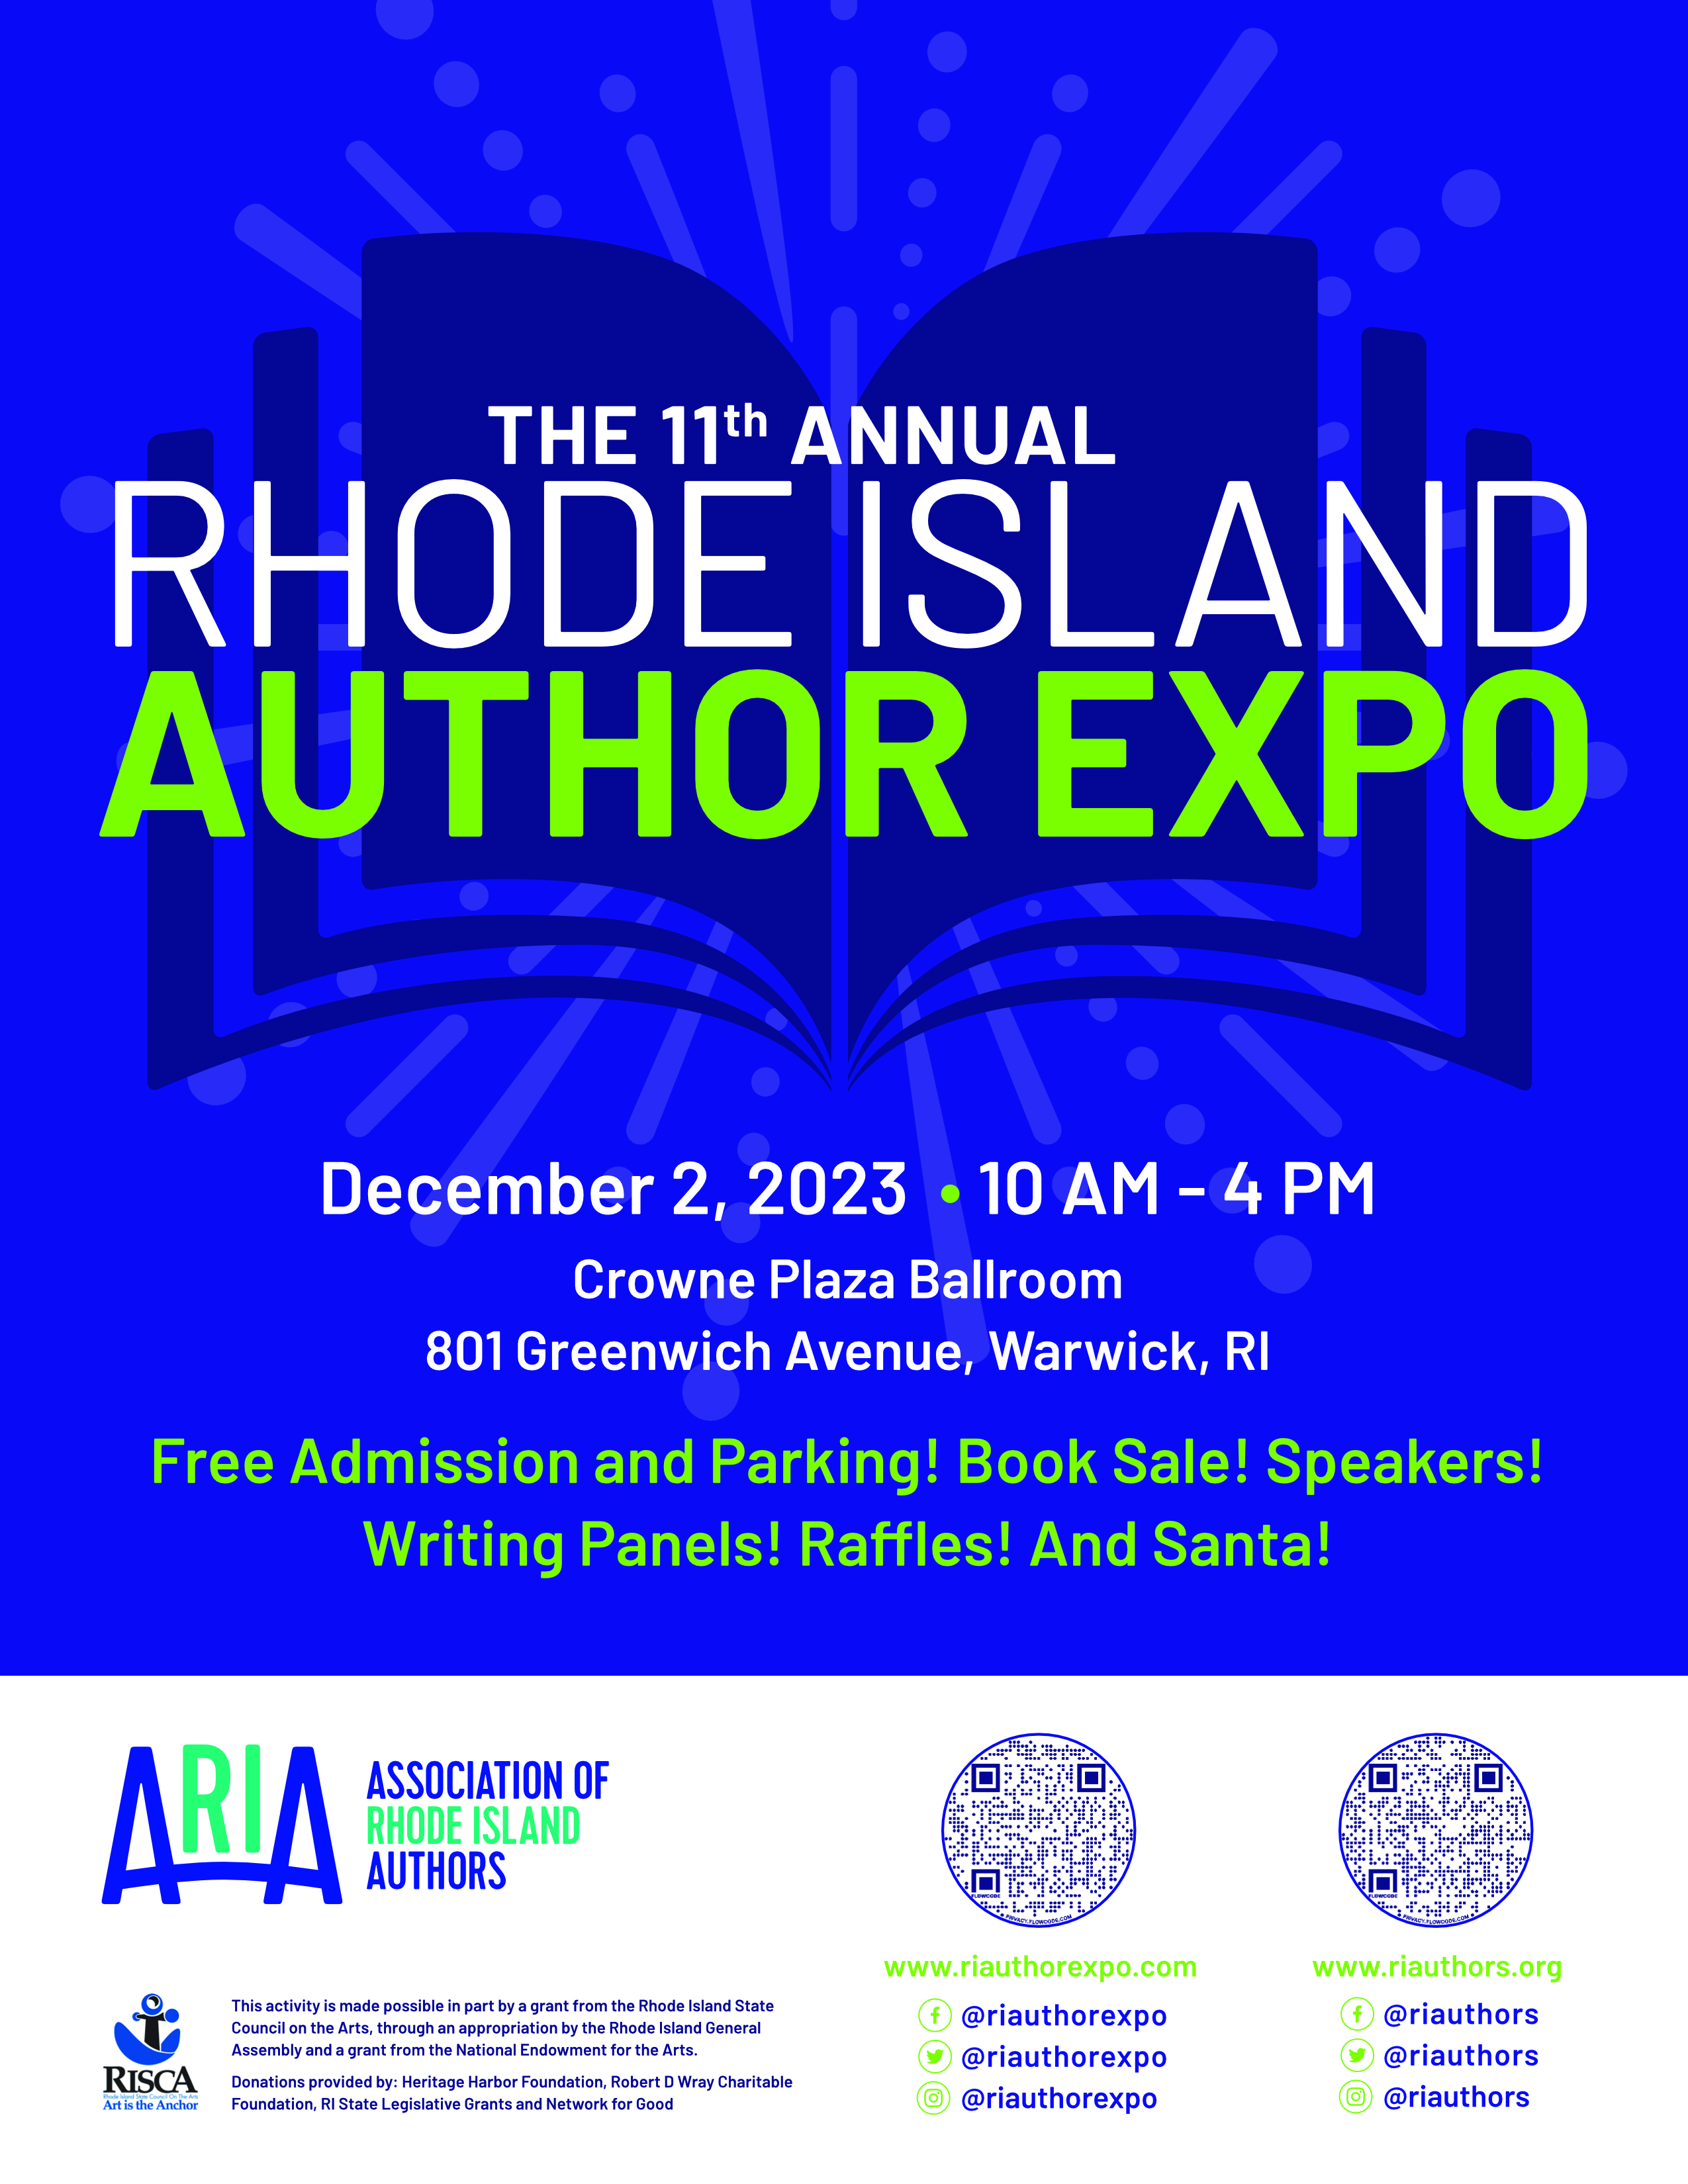 [Event] The 11th Annual Rhode Island Author Expo 12/2/23 10am-4pm